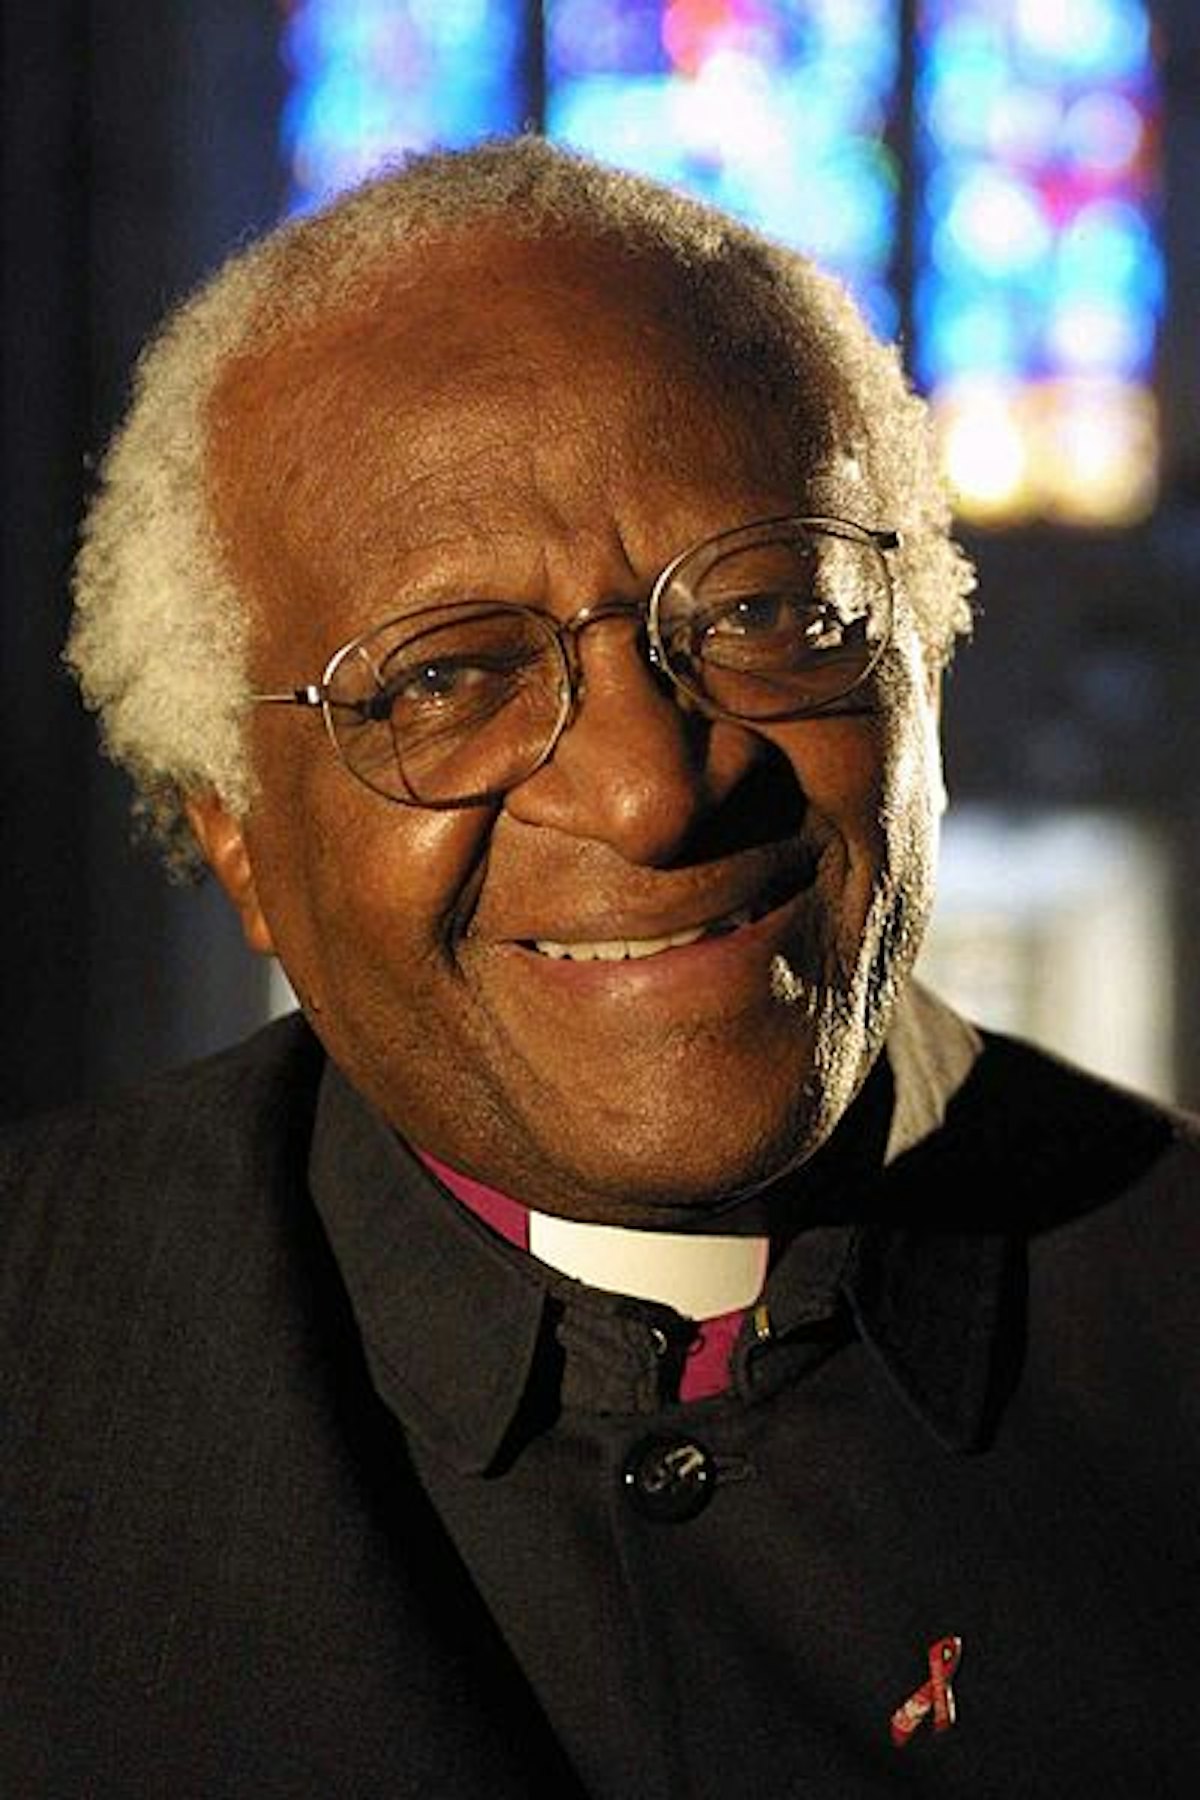 Nobel Peace laureate Desmond Tutu, who recently expressed his support of the right of the Baha’i community of Iran to higher education through the Education is Not a Crime campaign.